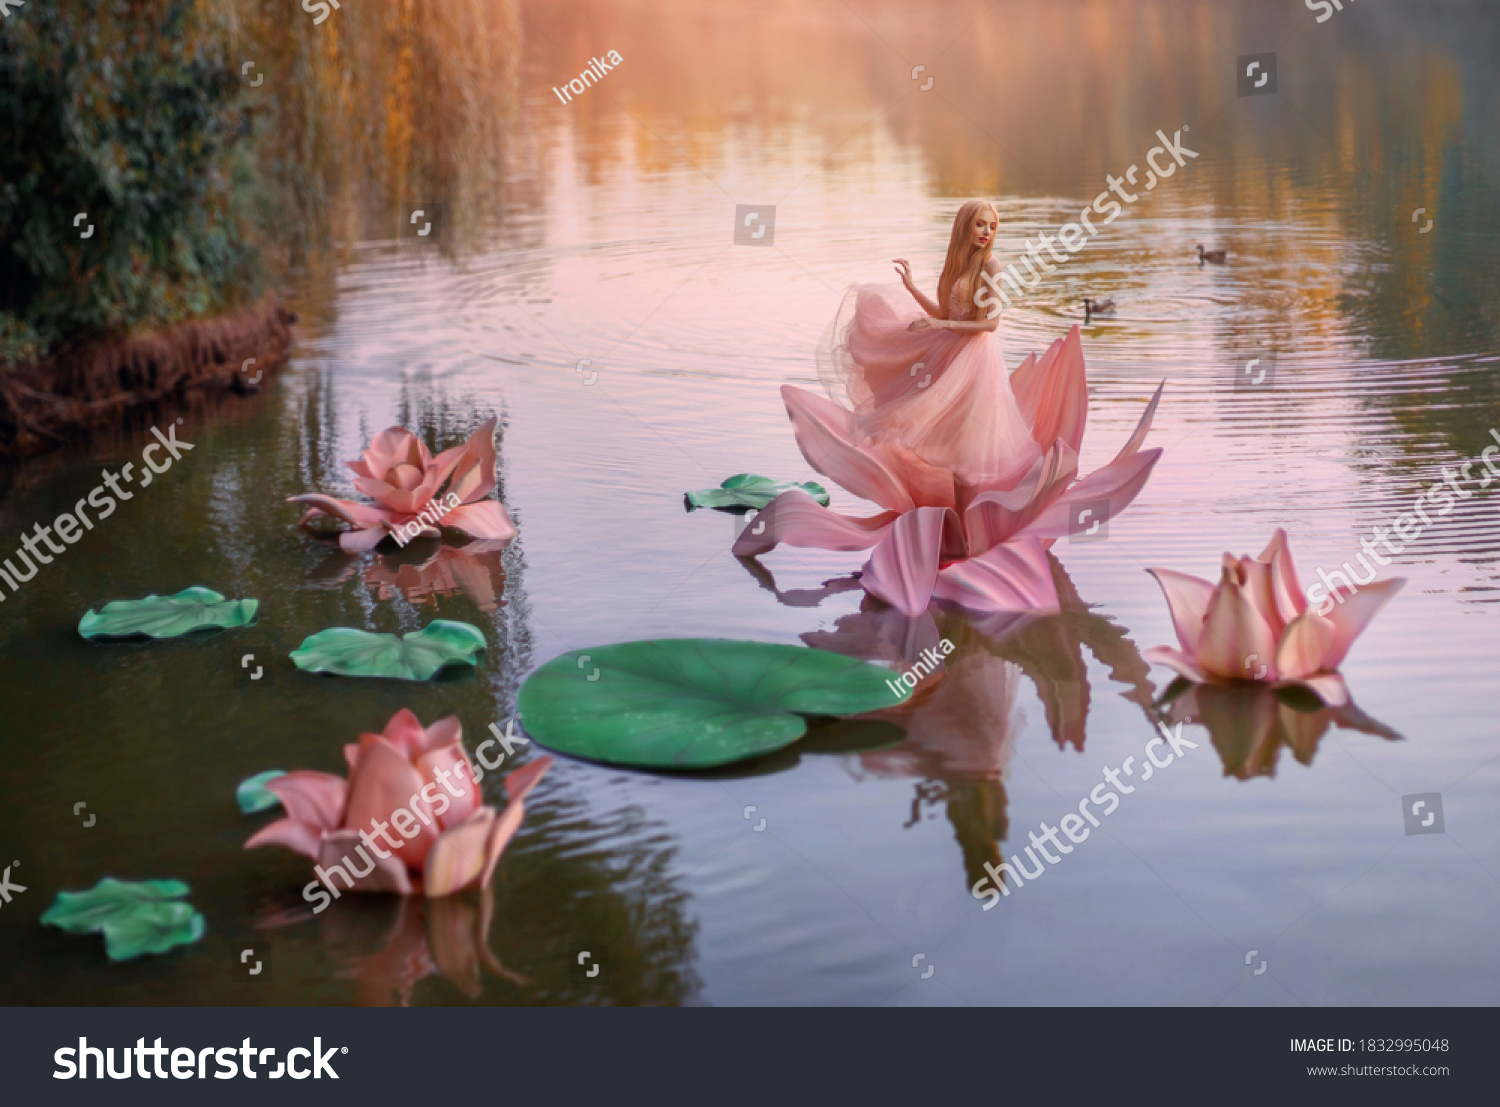 art photo fantasy. Autumn magic miracle. small blonde happy woman princess stands dancing in pink big huge lotus lily flower, on water of river. Short dress. image child of nature. Cartoon character #1832995048